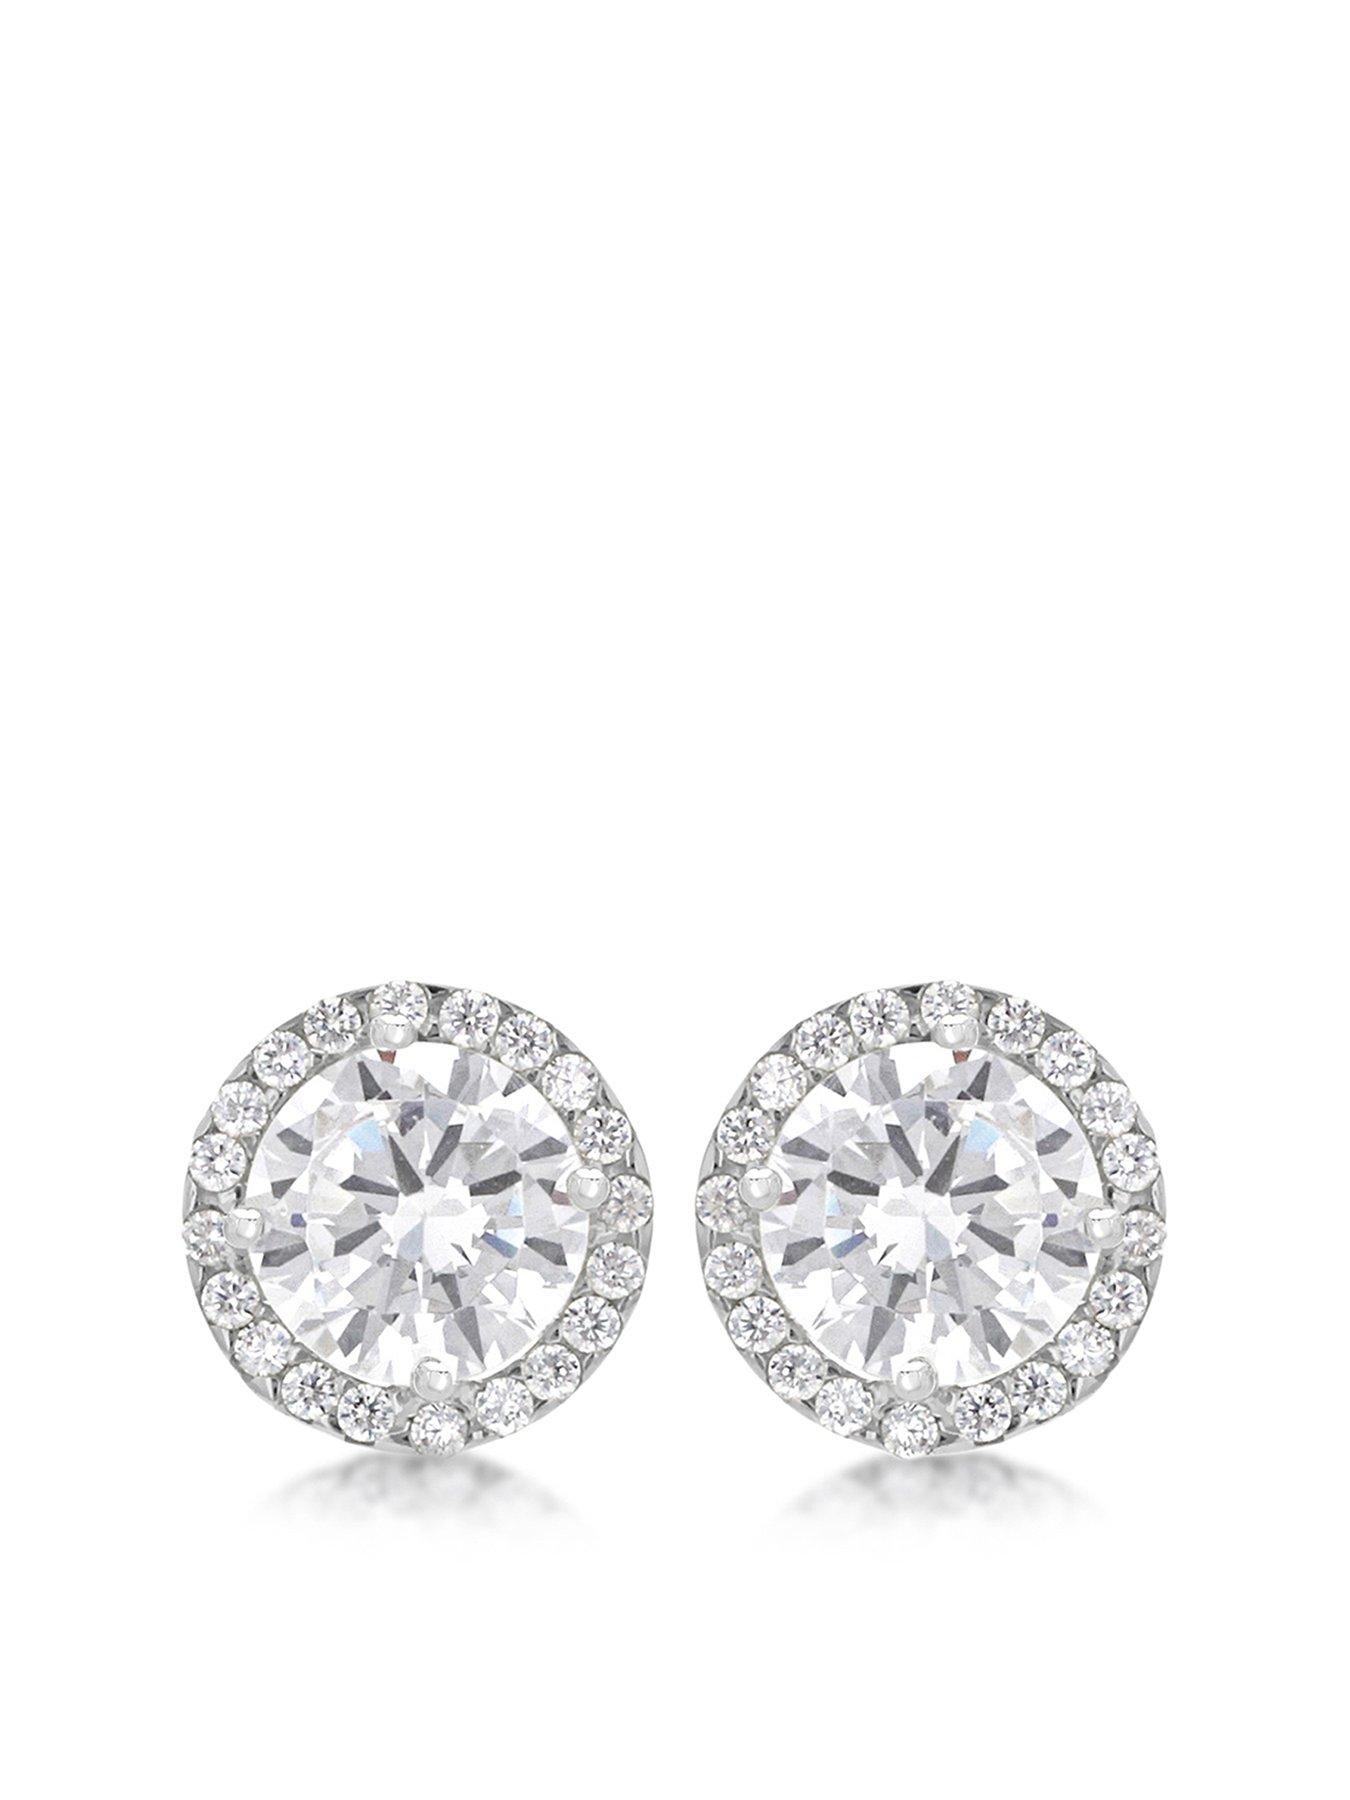  9ct White Gold Round Cubic Zirconia and Pave Set 9mm Stud Earrings